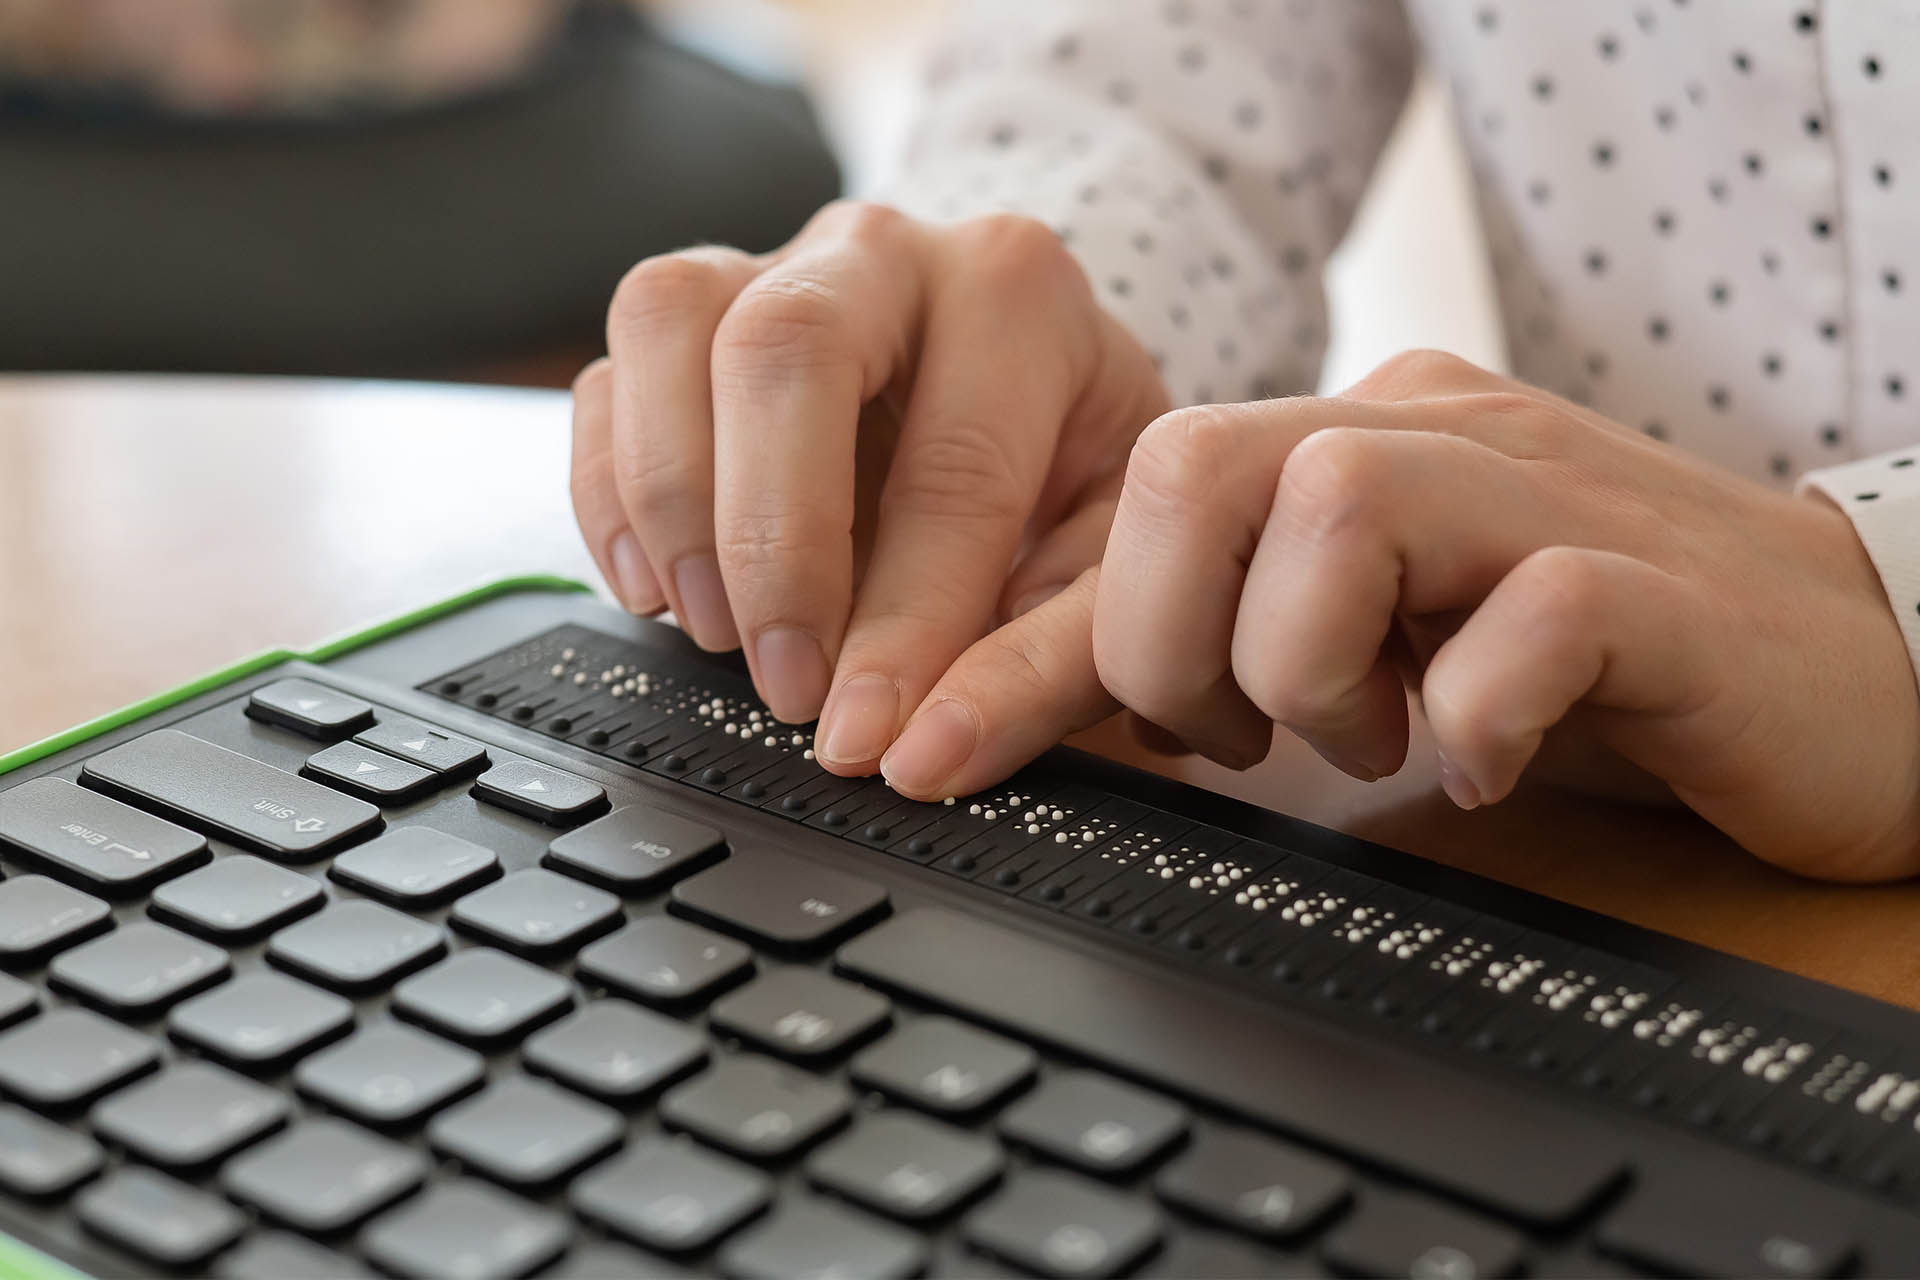 A woman uses a computer with a Braille display and a computer keyboard